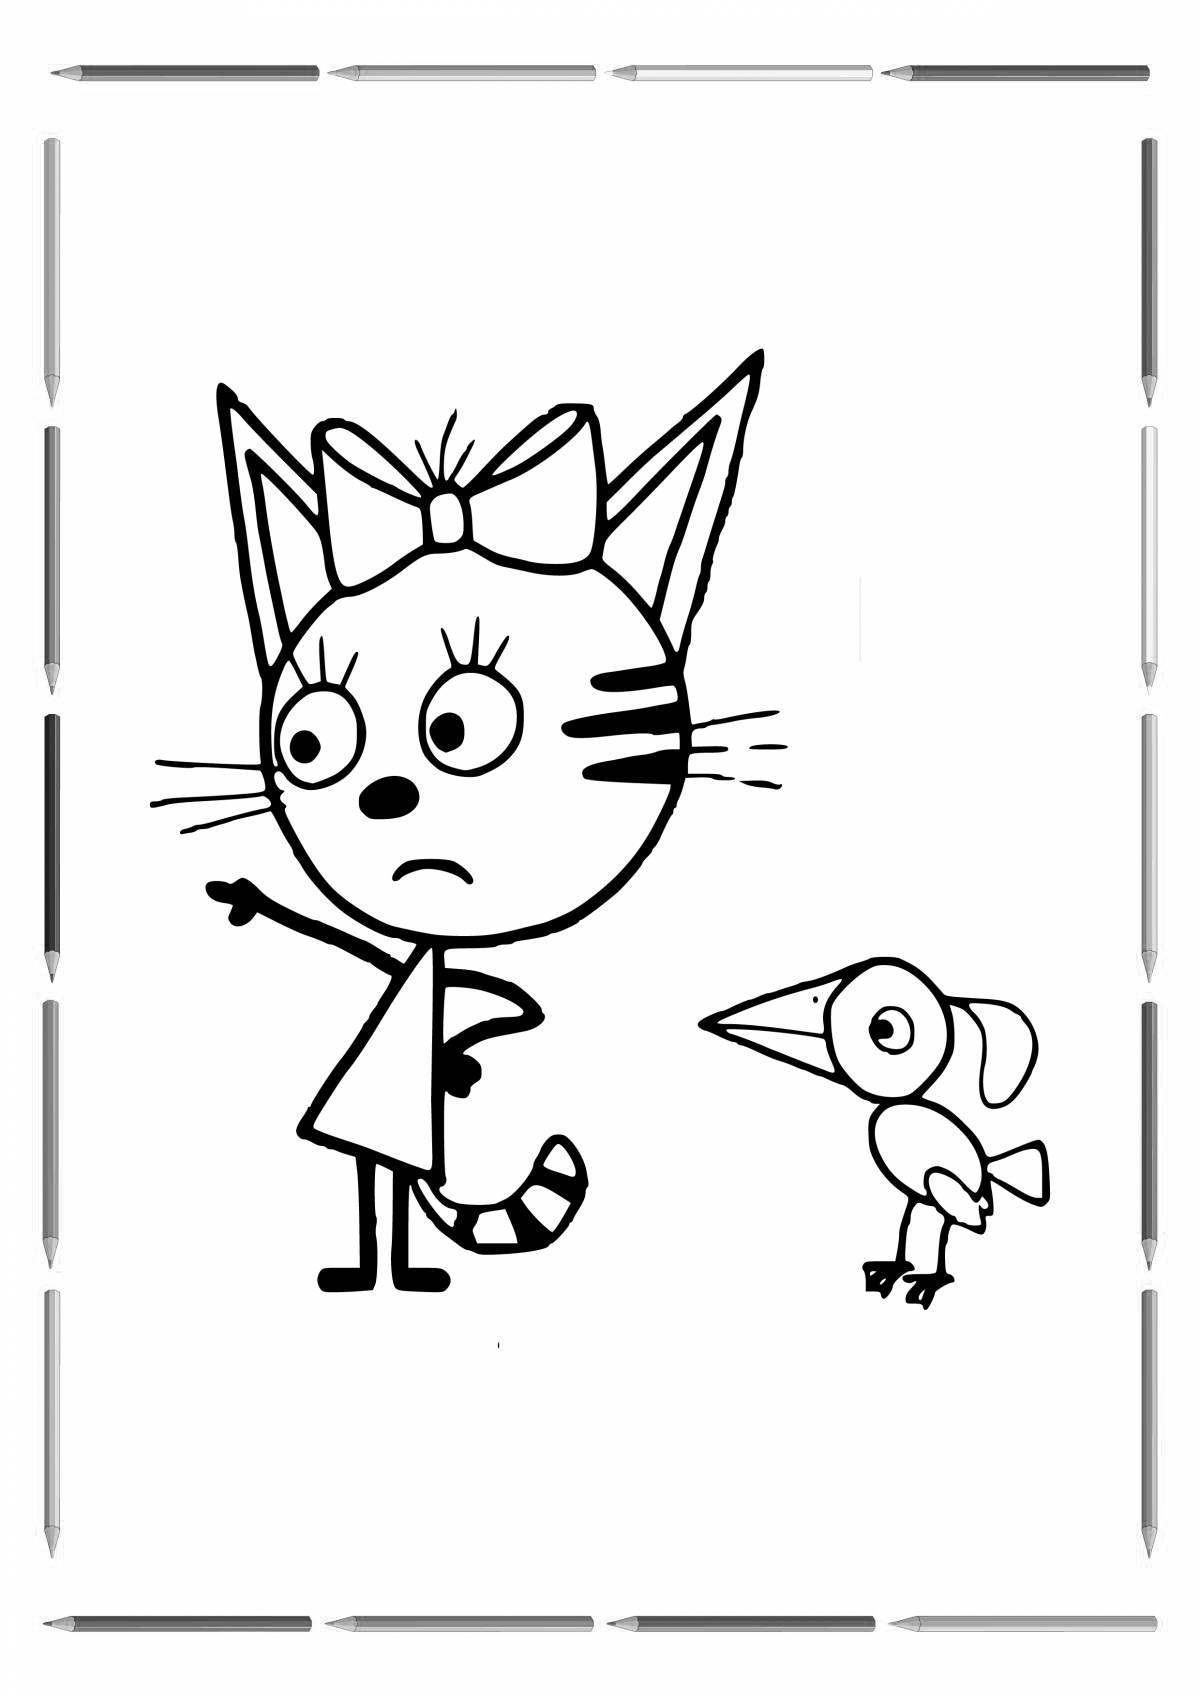 Blessed 3 cats coloring pages for girls